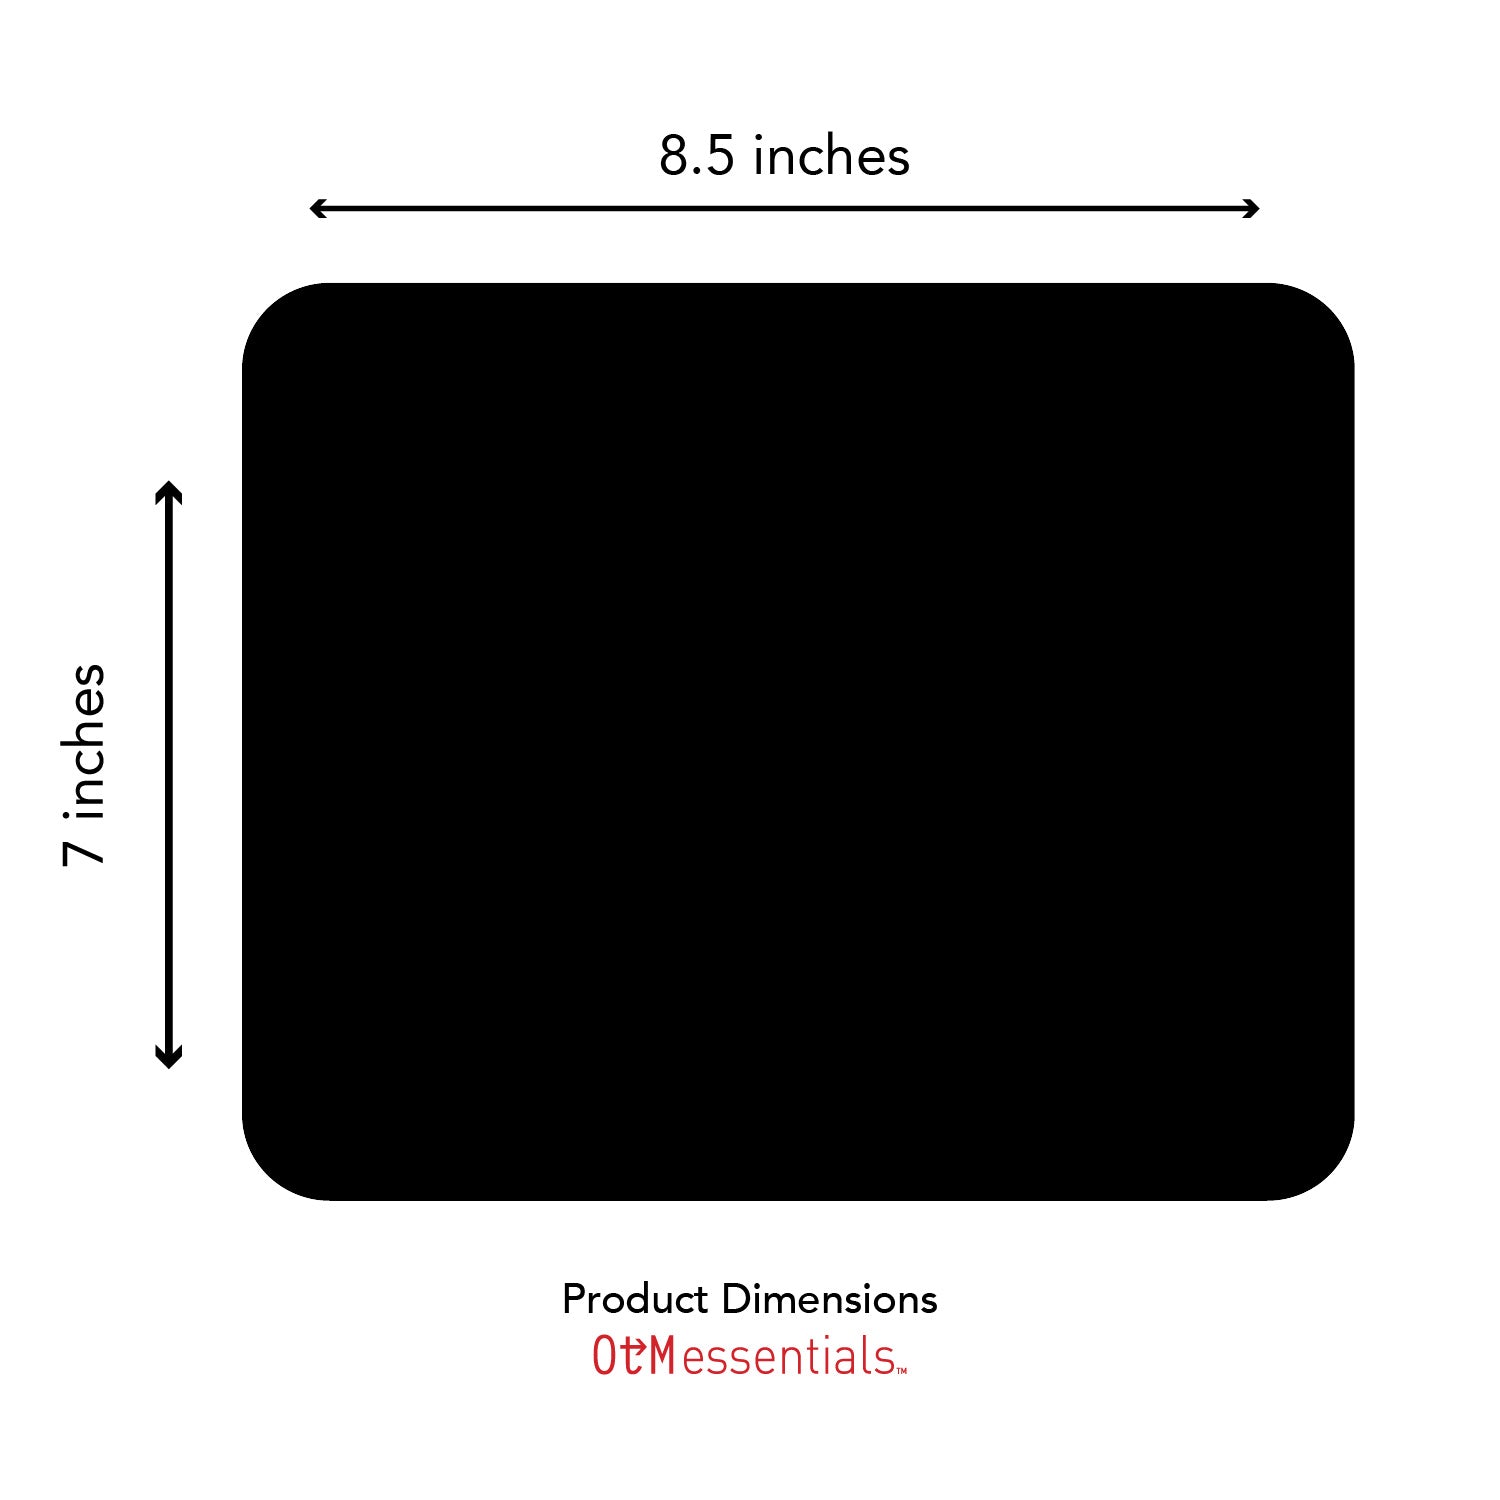 OC-NW-MH39A, Product Dimensions